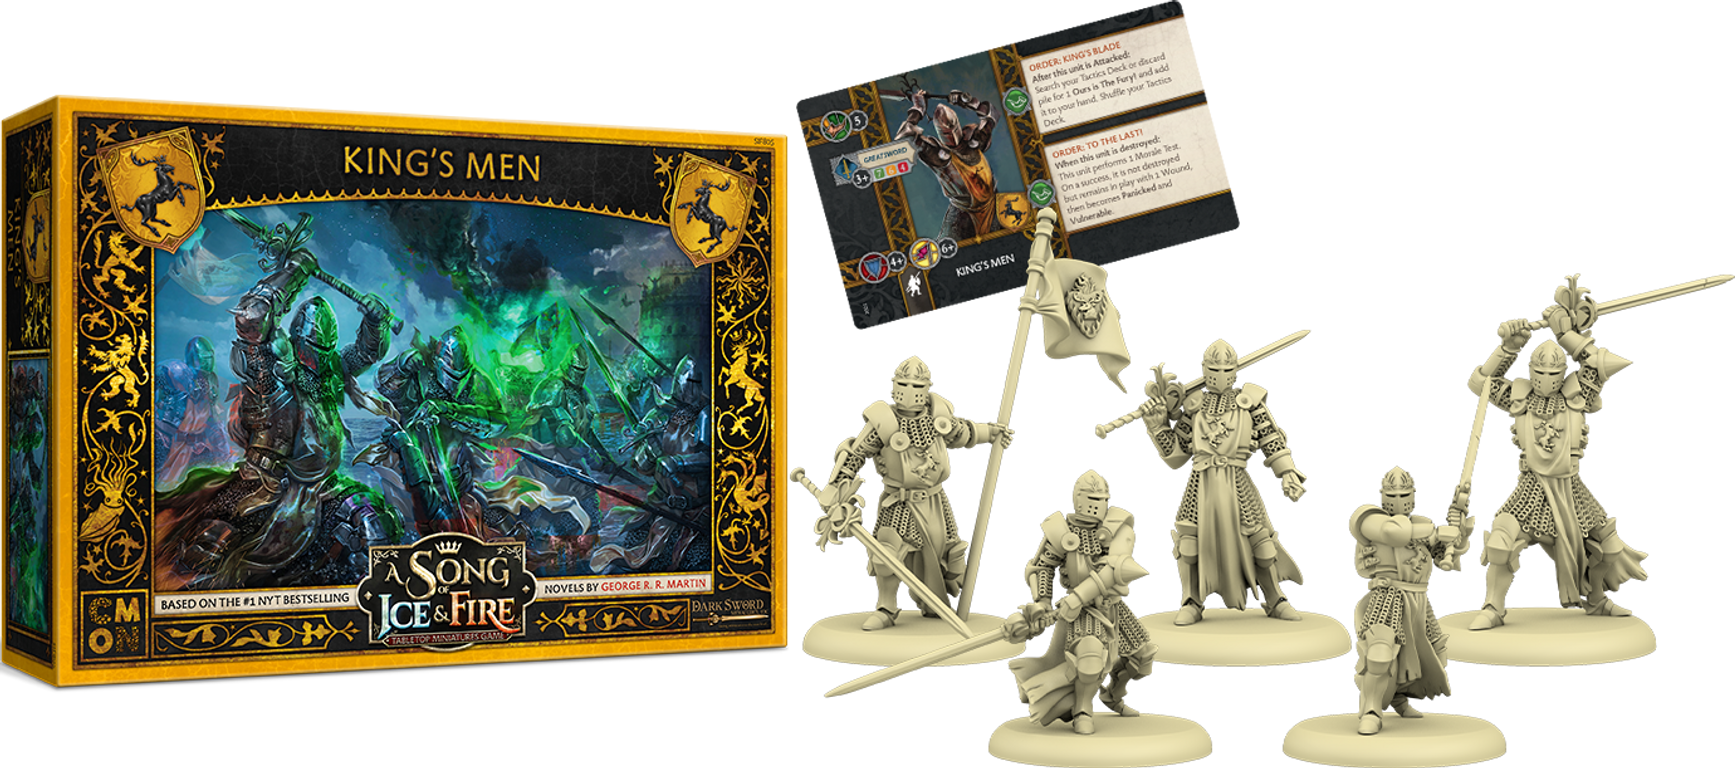 A Song of Ice & Fire: Tabletop Miniatures Game – King's Men componenti